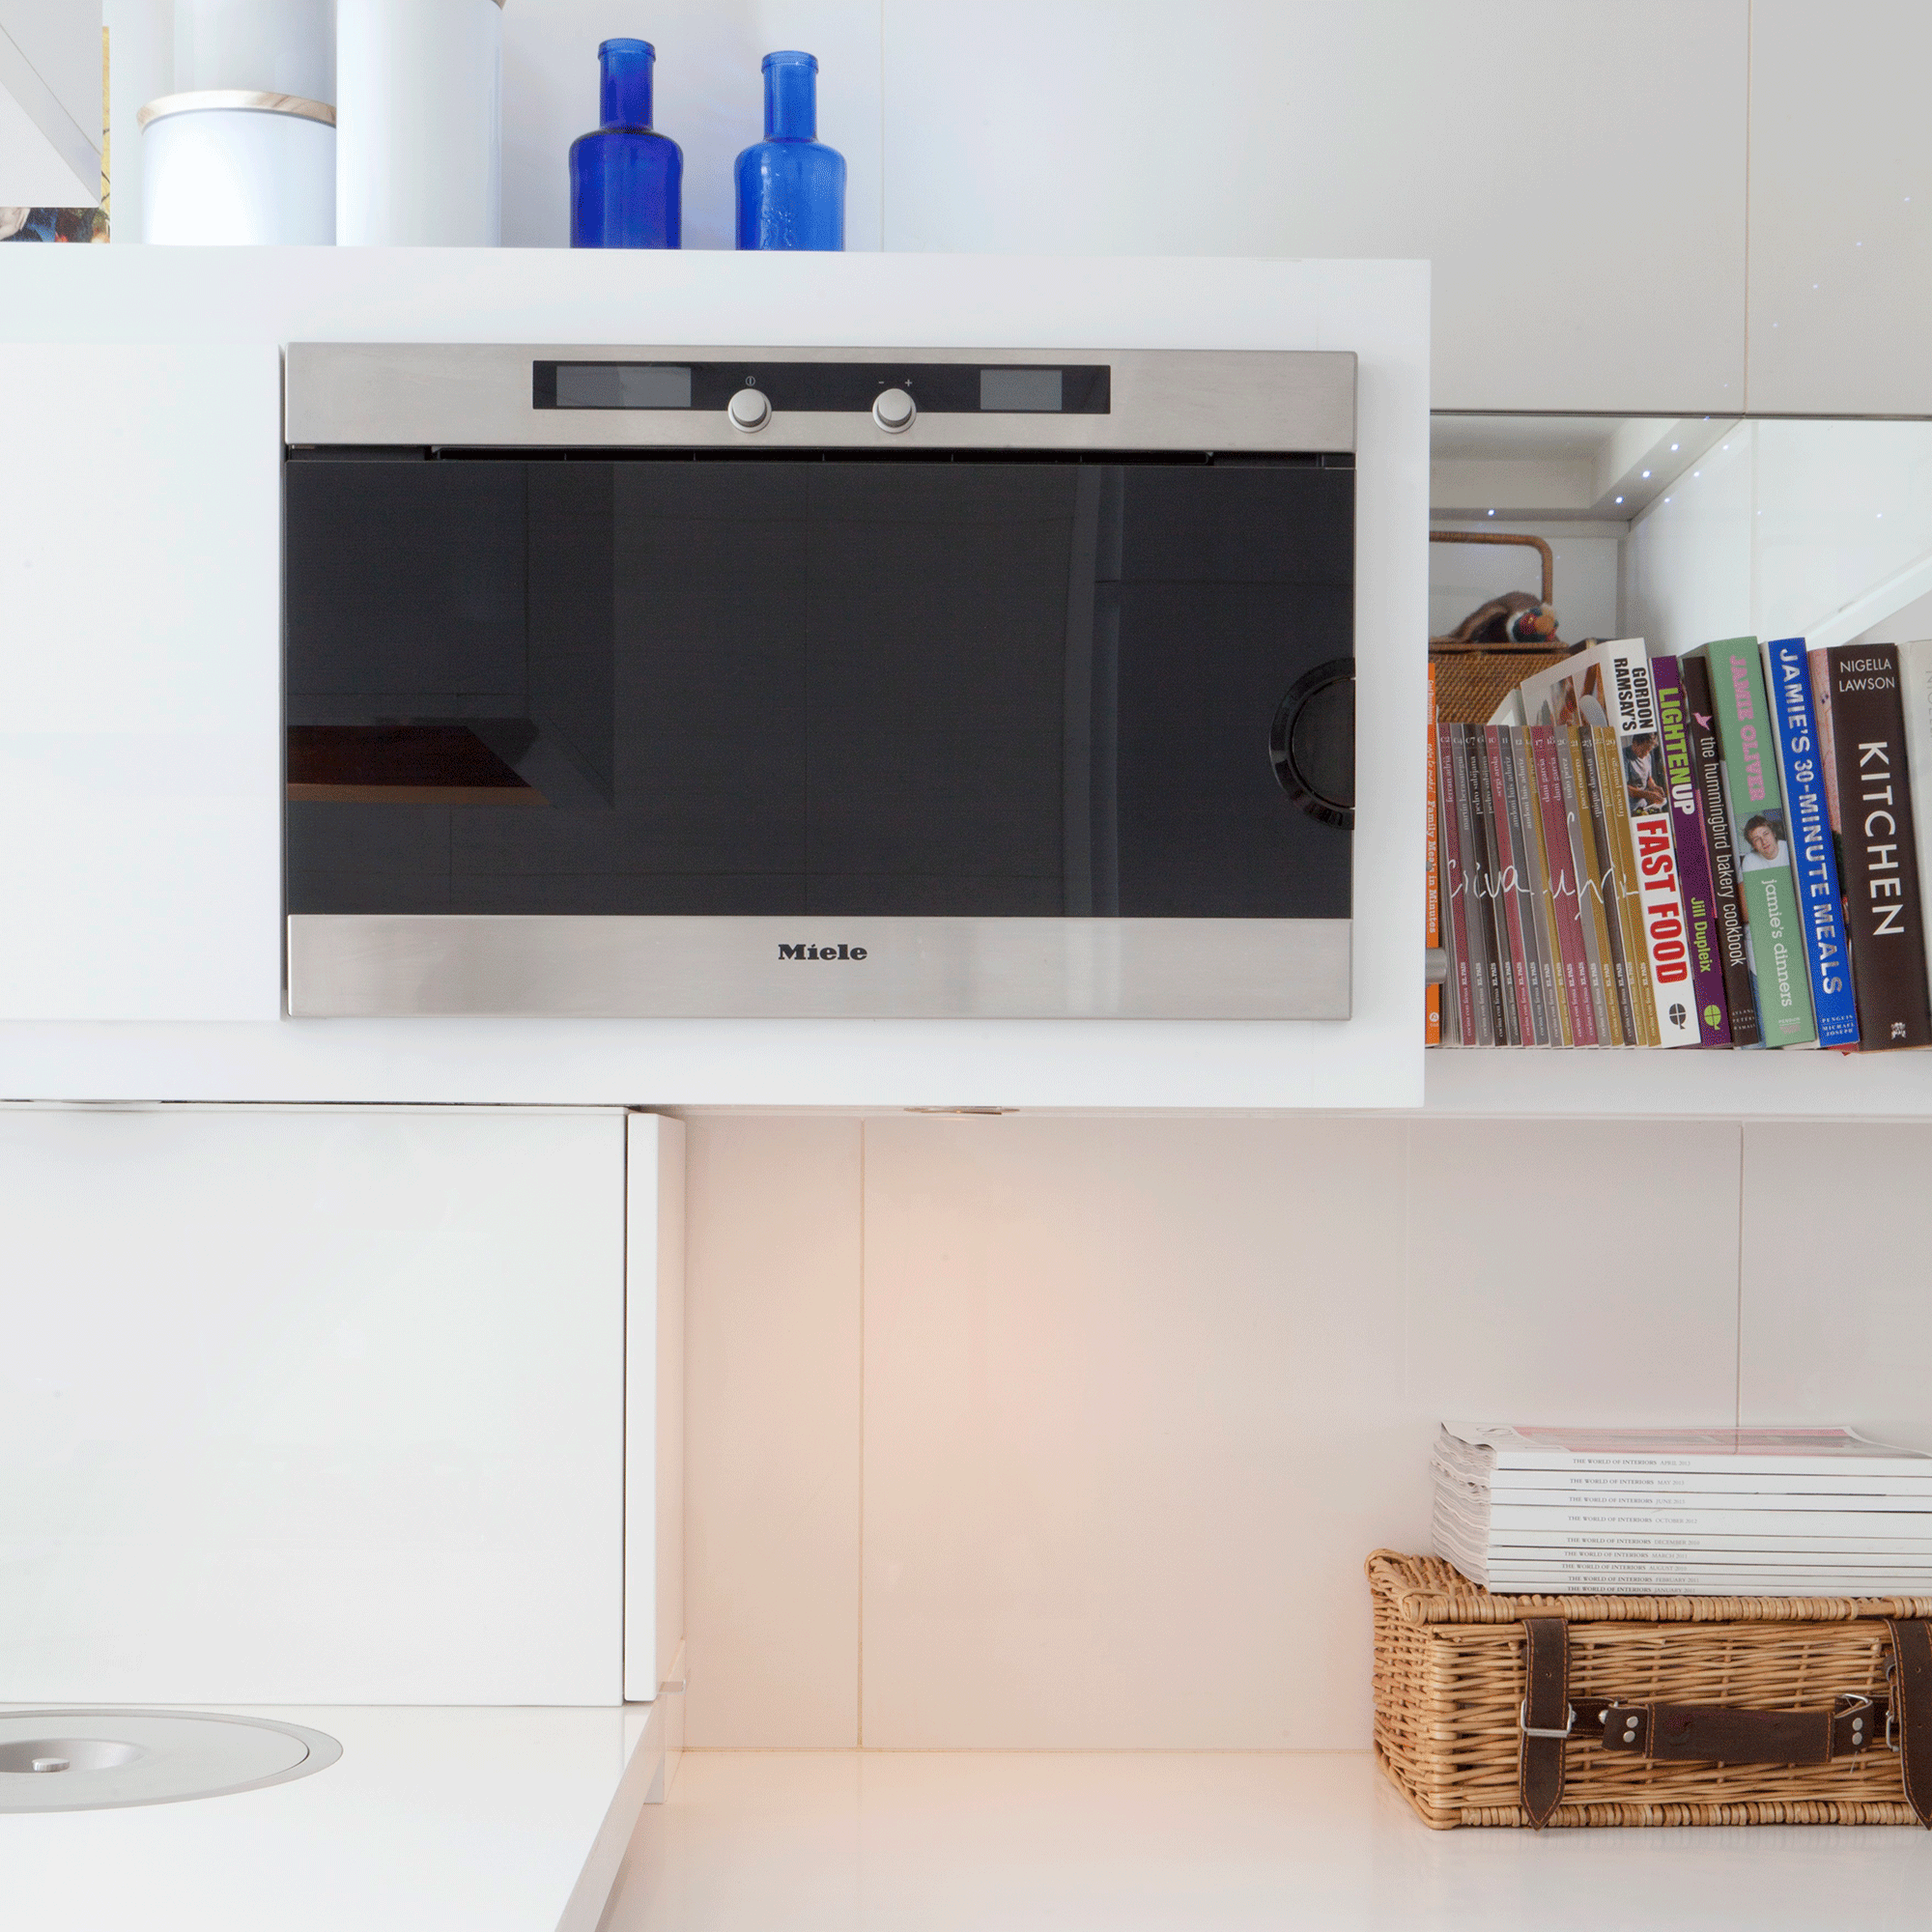 Silver microwave in white kitchen with book shelf